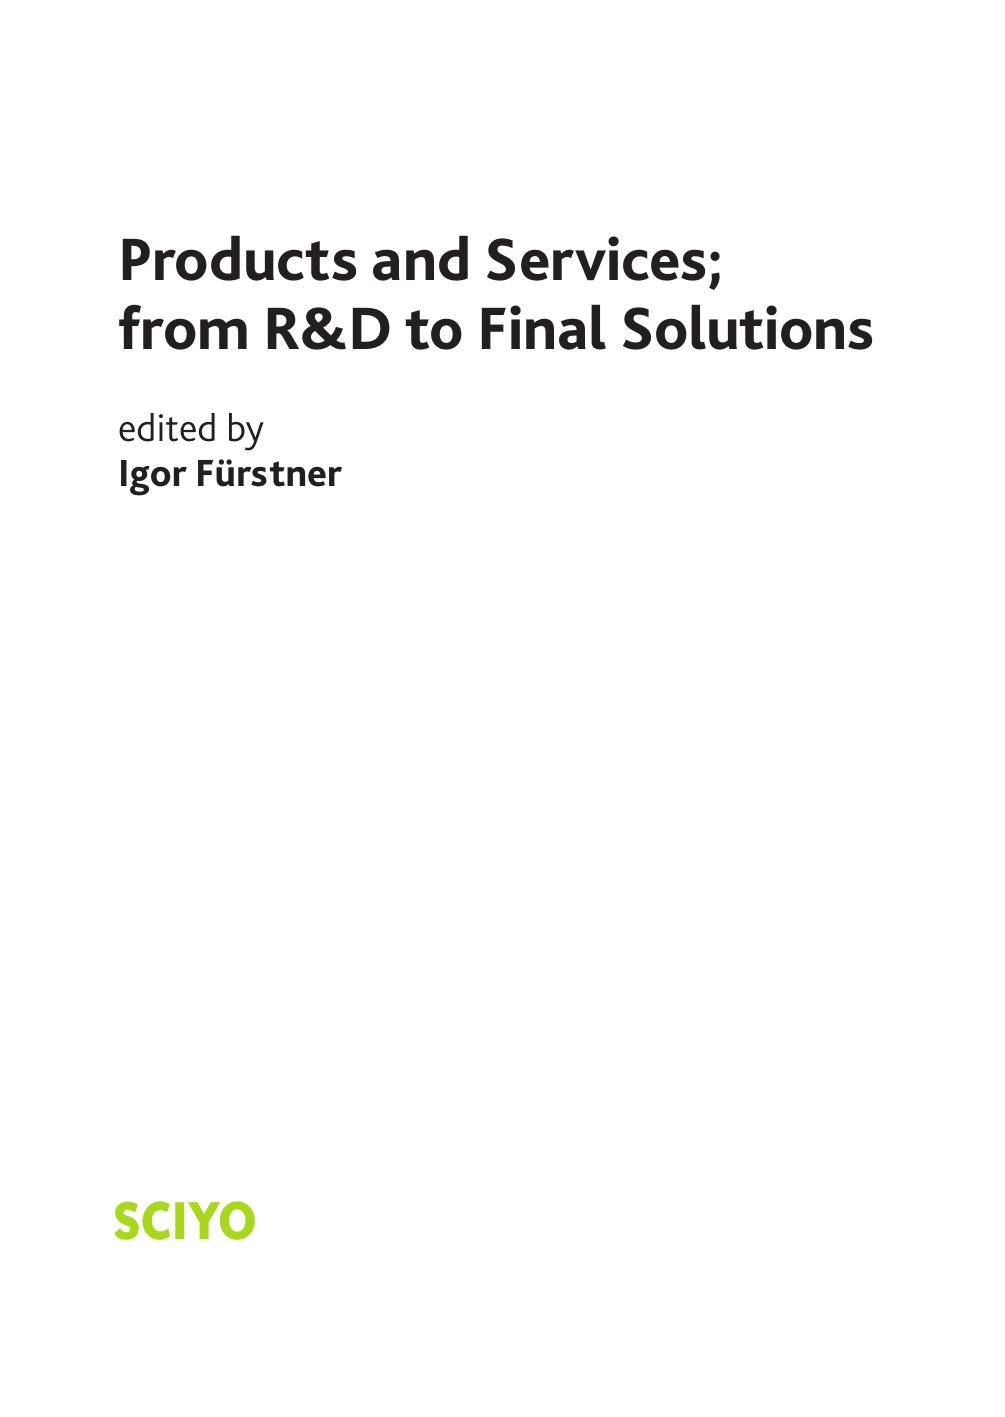 Impressum_Products and Services; from R&D to Final Solutions.indd